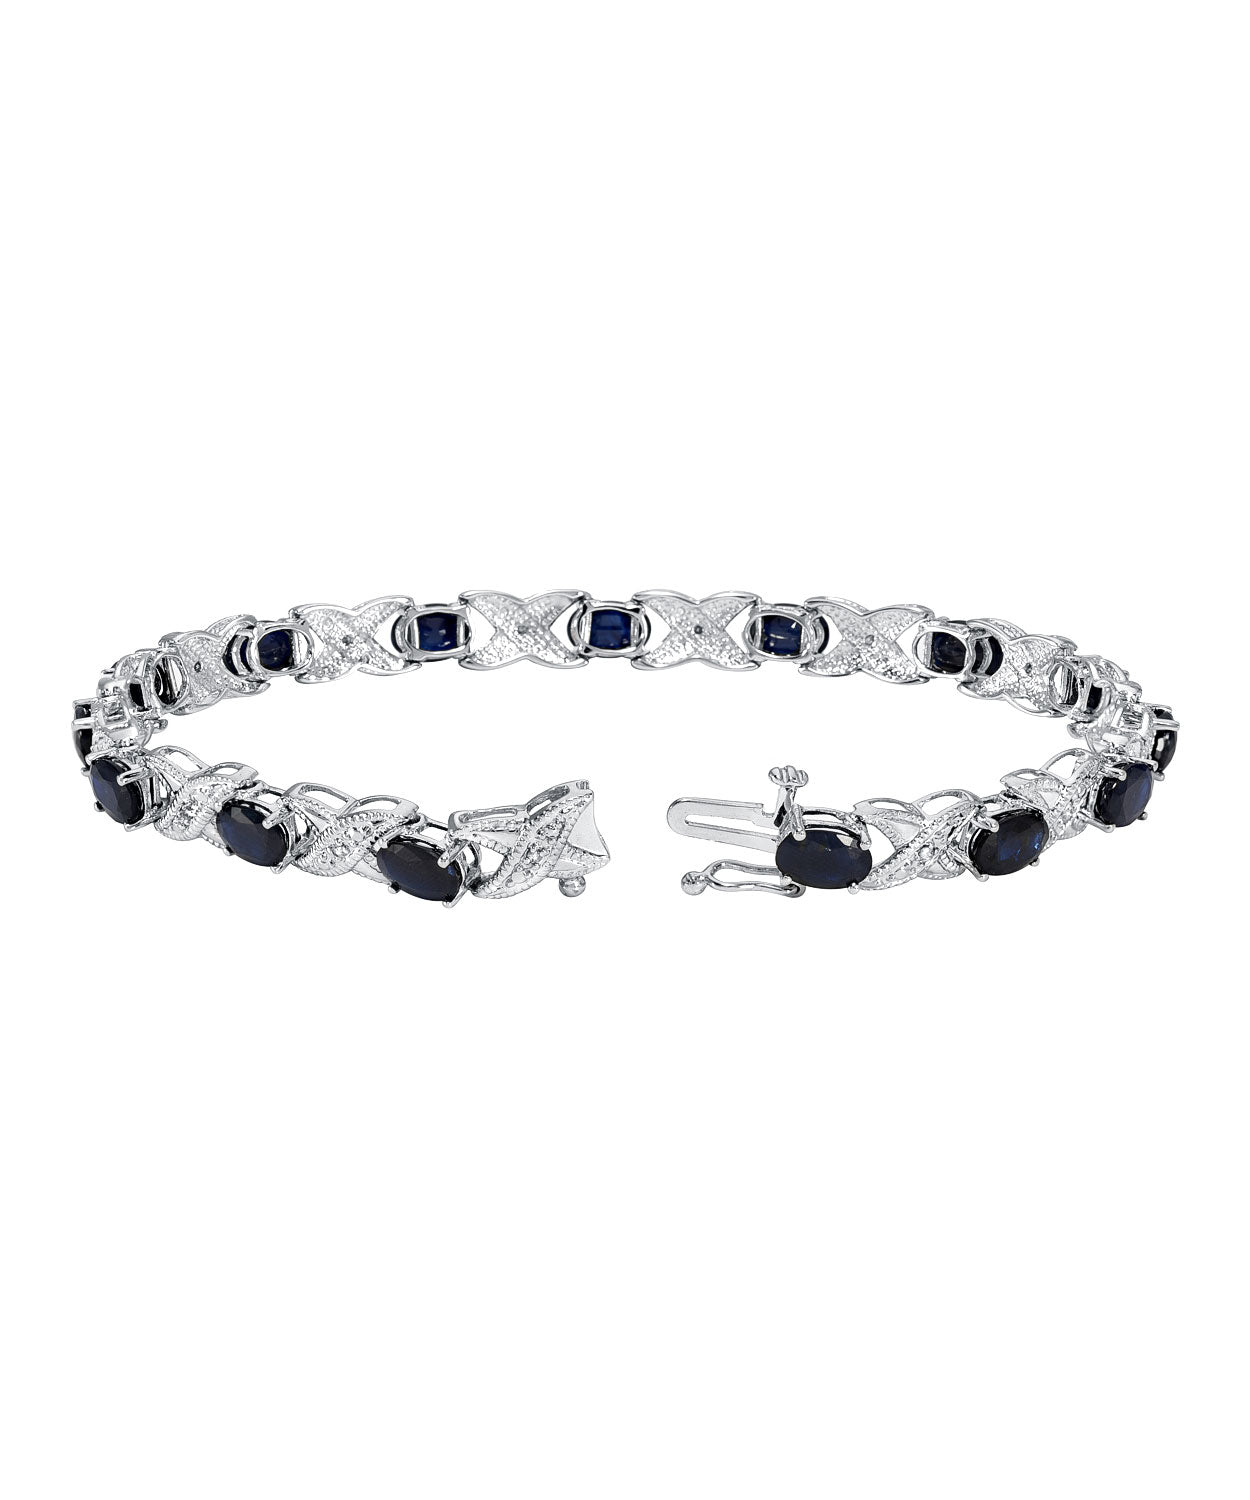 8.44ctw Natural Midnight Blue Sapphire and Diamond 14k Gold Link Bracelet View 2